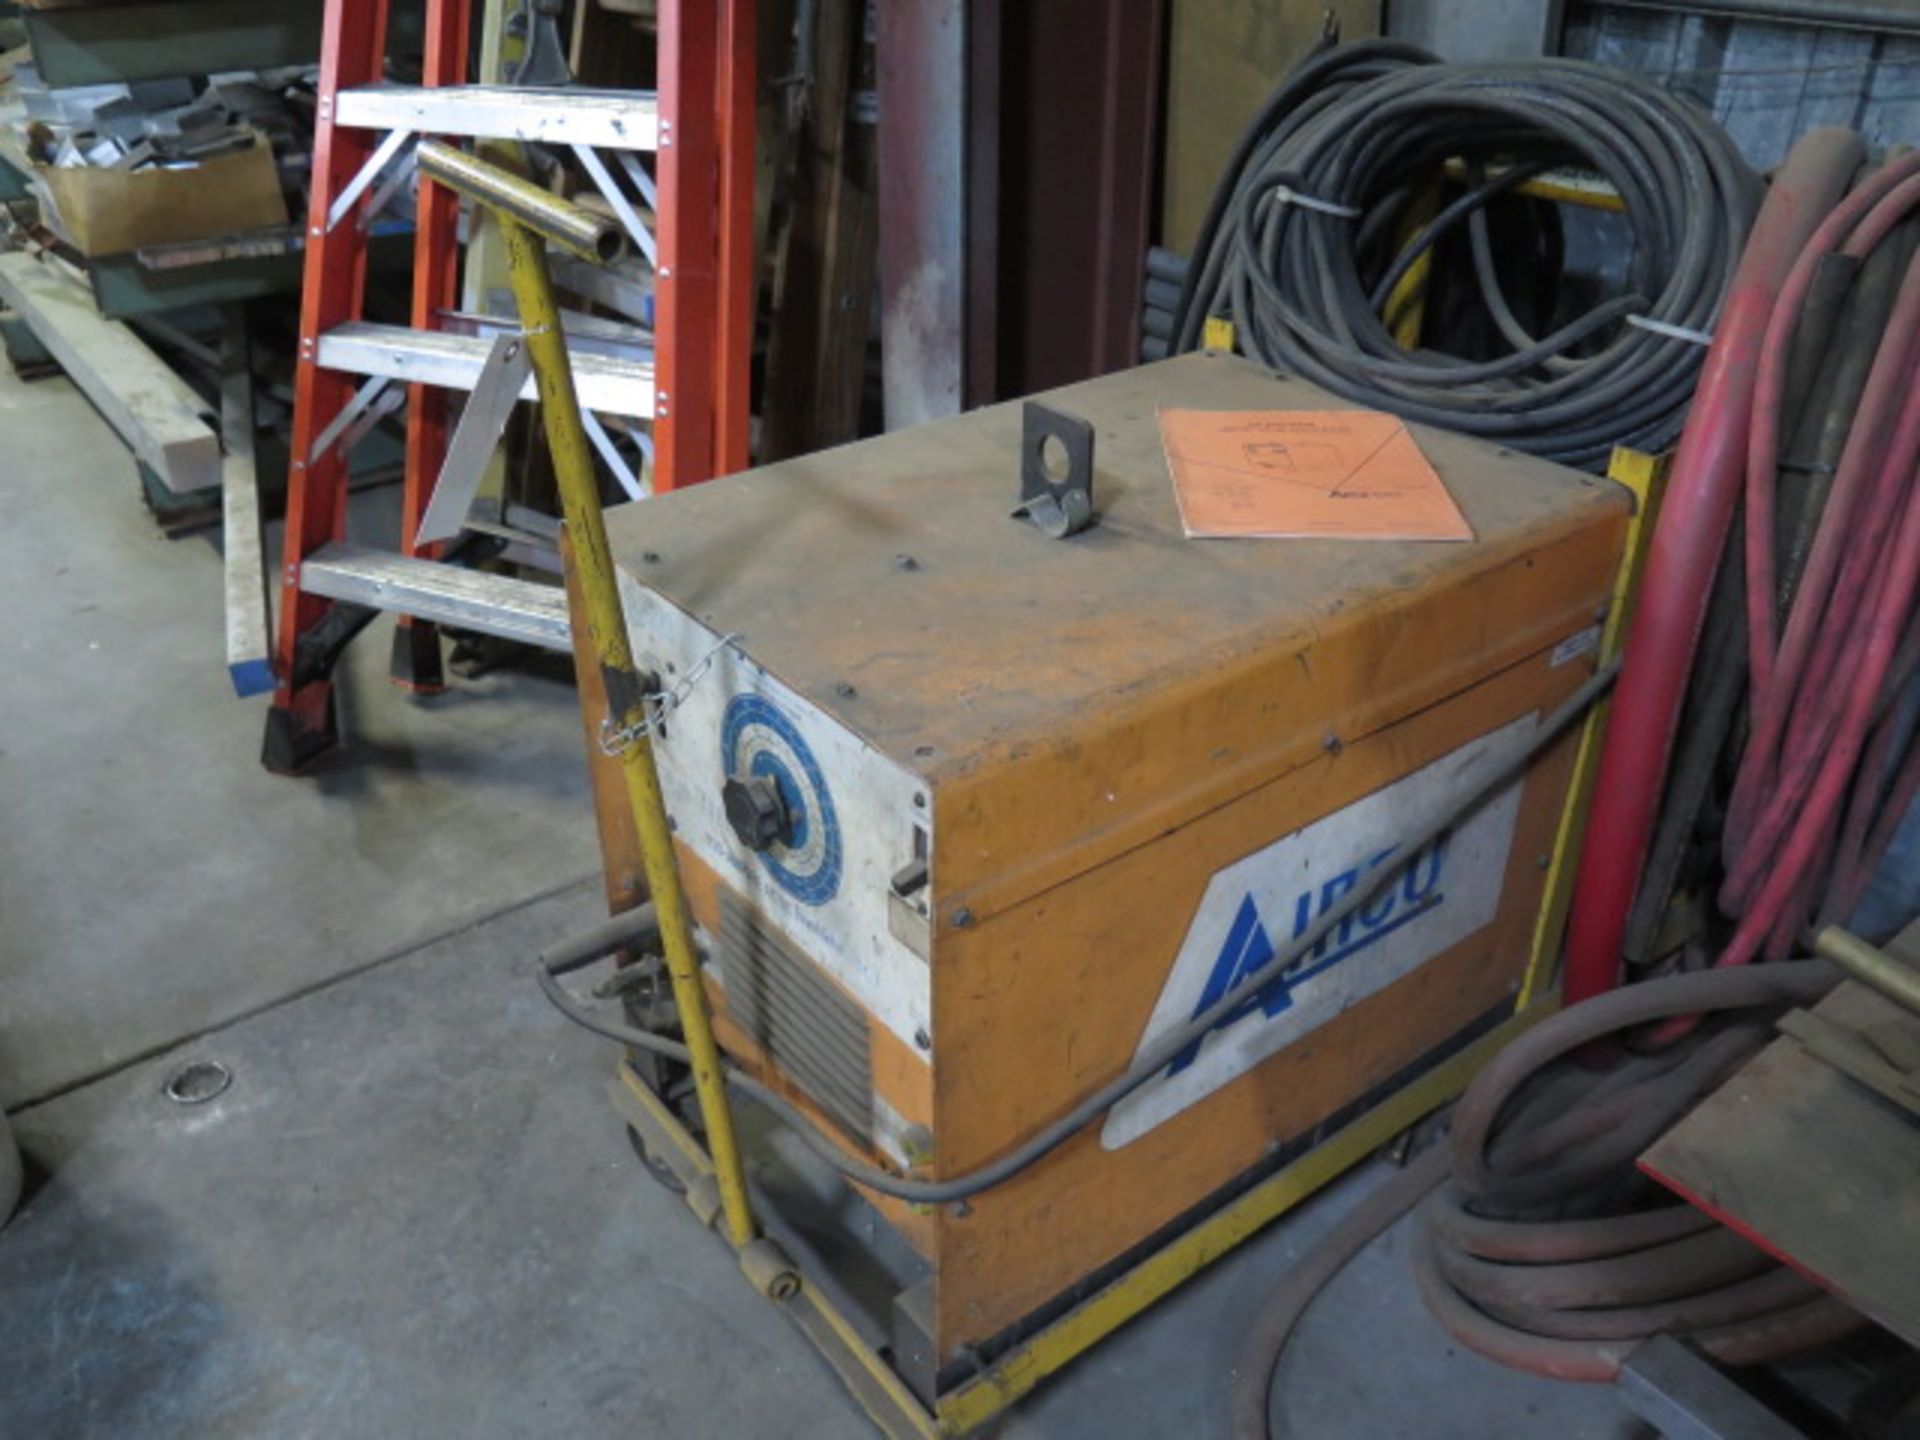 Airco 250 Amp AC/DC “Bumblebee” Arc Welding Power Source - Image 2 of 4